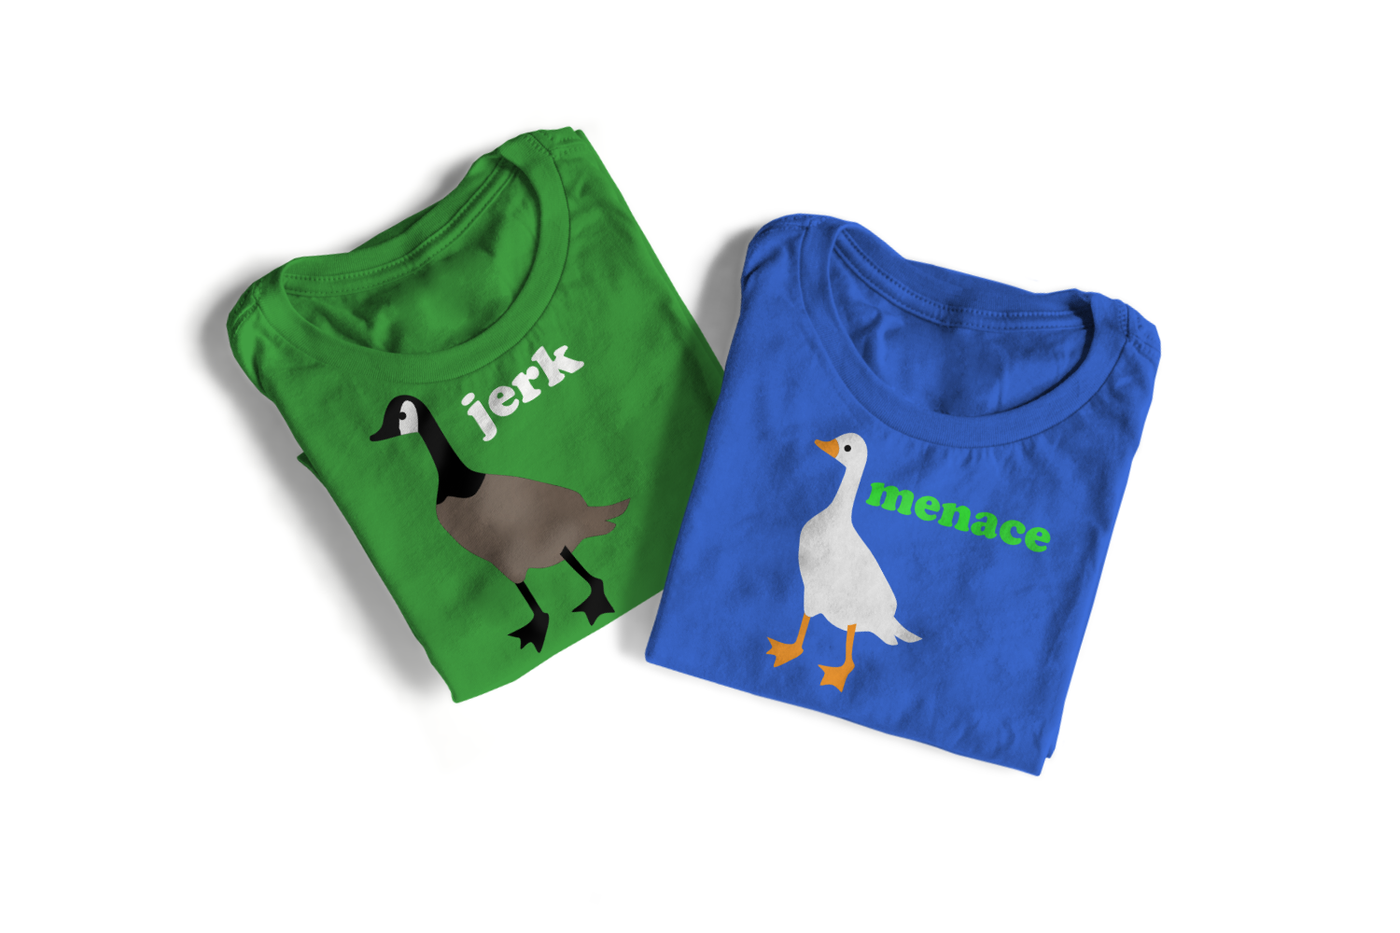 A green tee with a Canadian goose that says "jerk" and a blue tee with a white goose that says "menace."